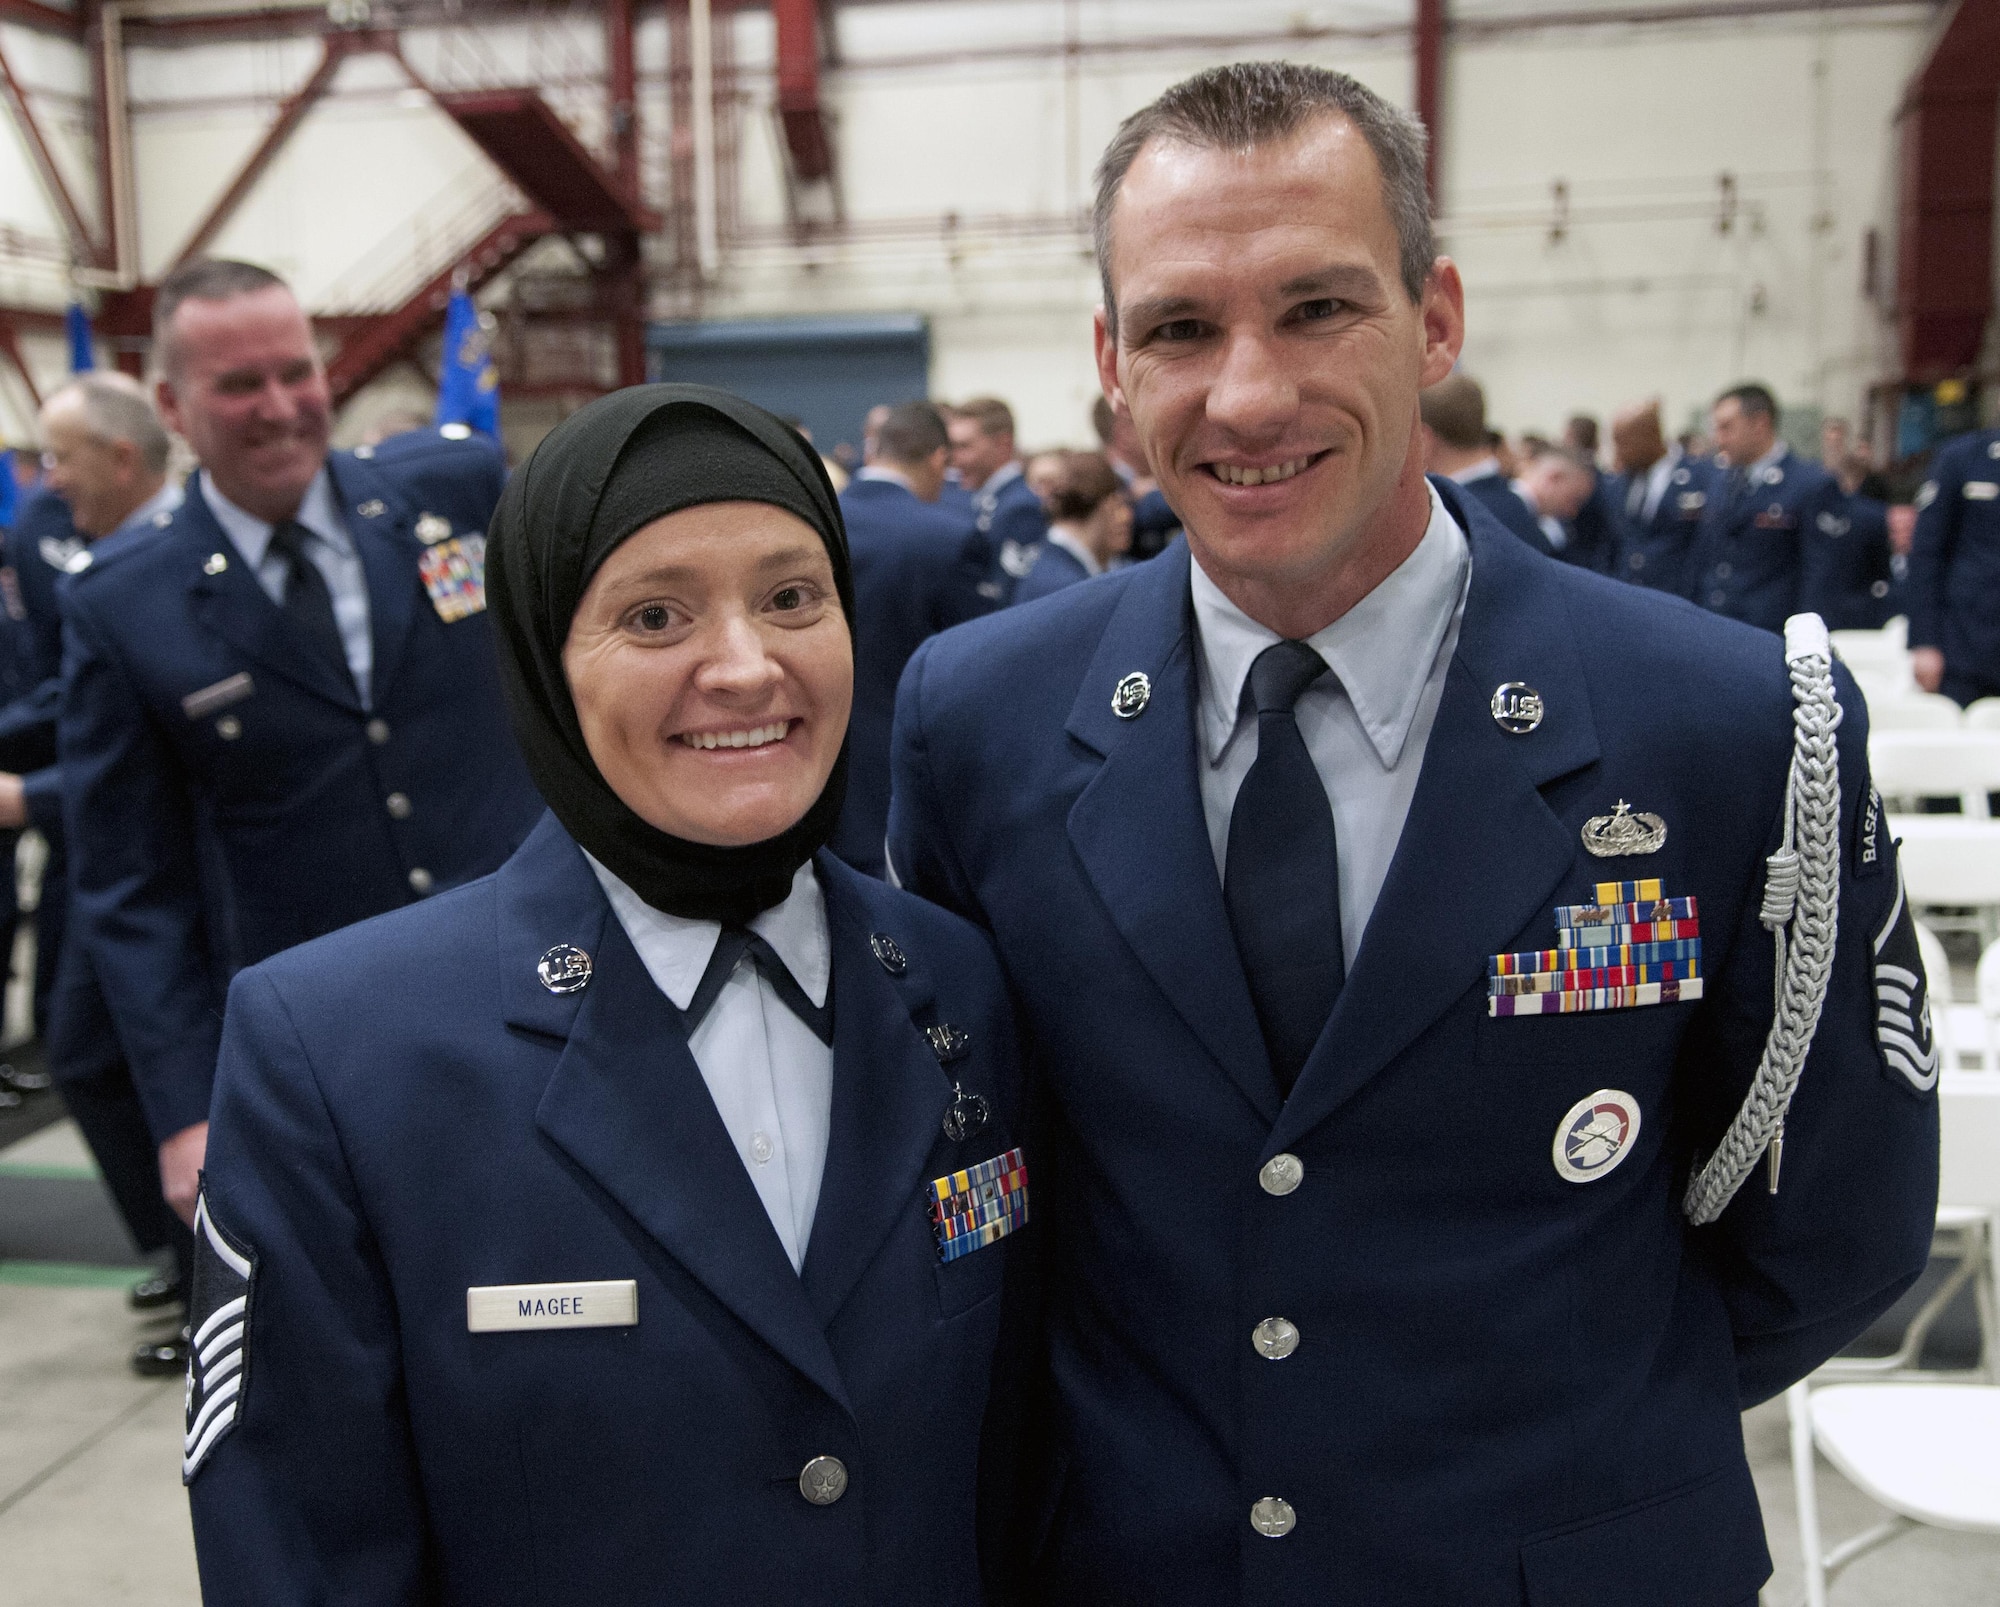 Master Sgts. Laura and Mark Magee attend the annual Nevada Air National Guard Airman of the Year Ceremony at the Nevada ANG’s fuel cell hangar Dec. 4, 2016. The married couple converted to Islam after Laura completed the chaplain assistant course in Fort Jackson, S.C. three years ago. (U.S. Air National Guard photo/Tech. Sgt. Emerson Marcus)